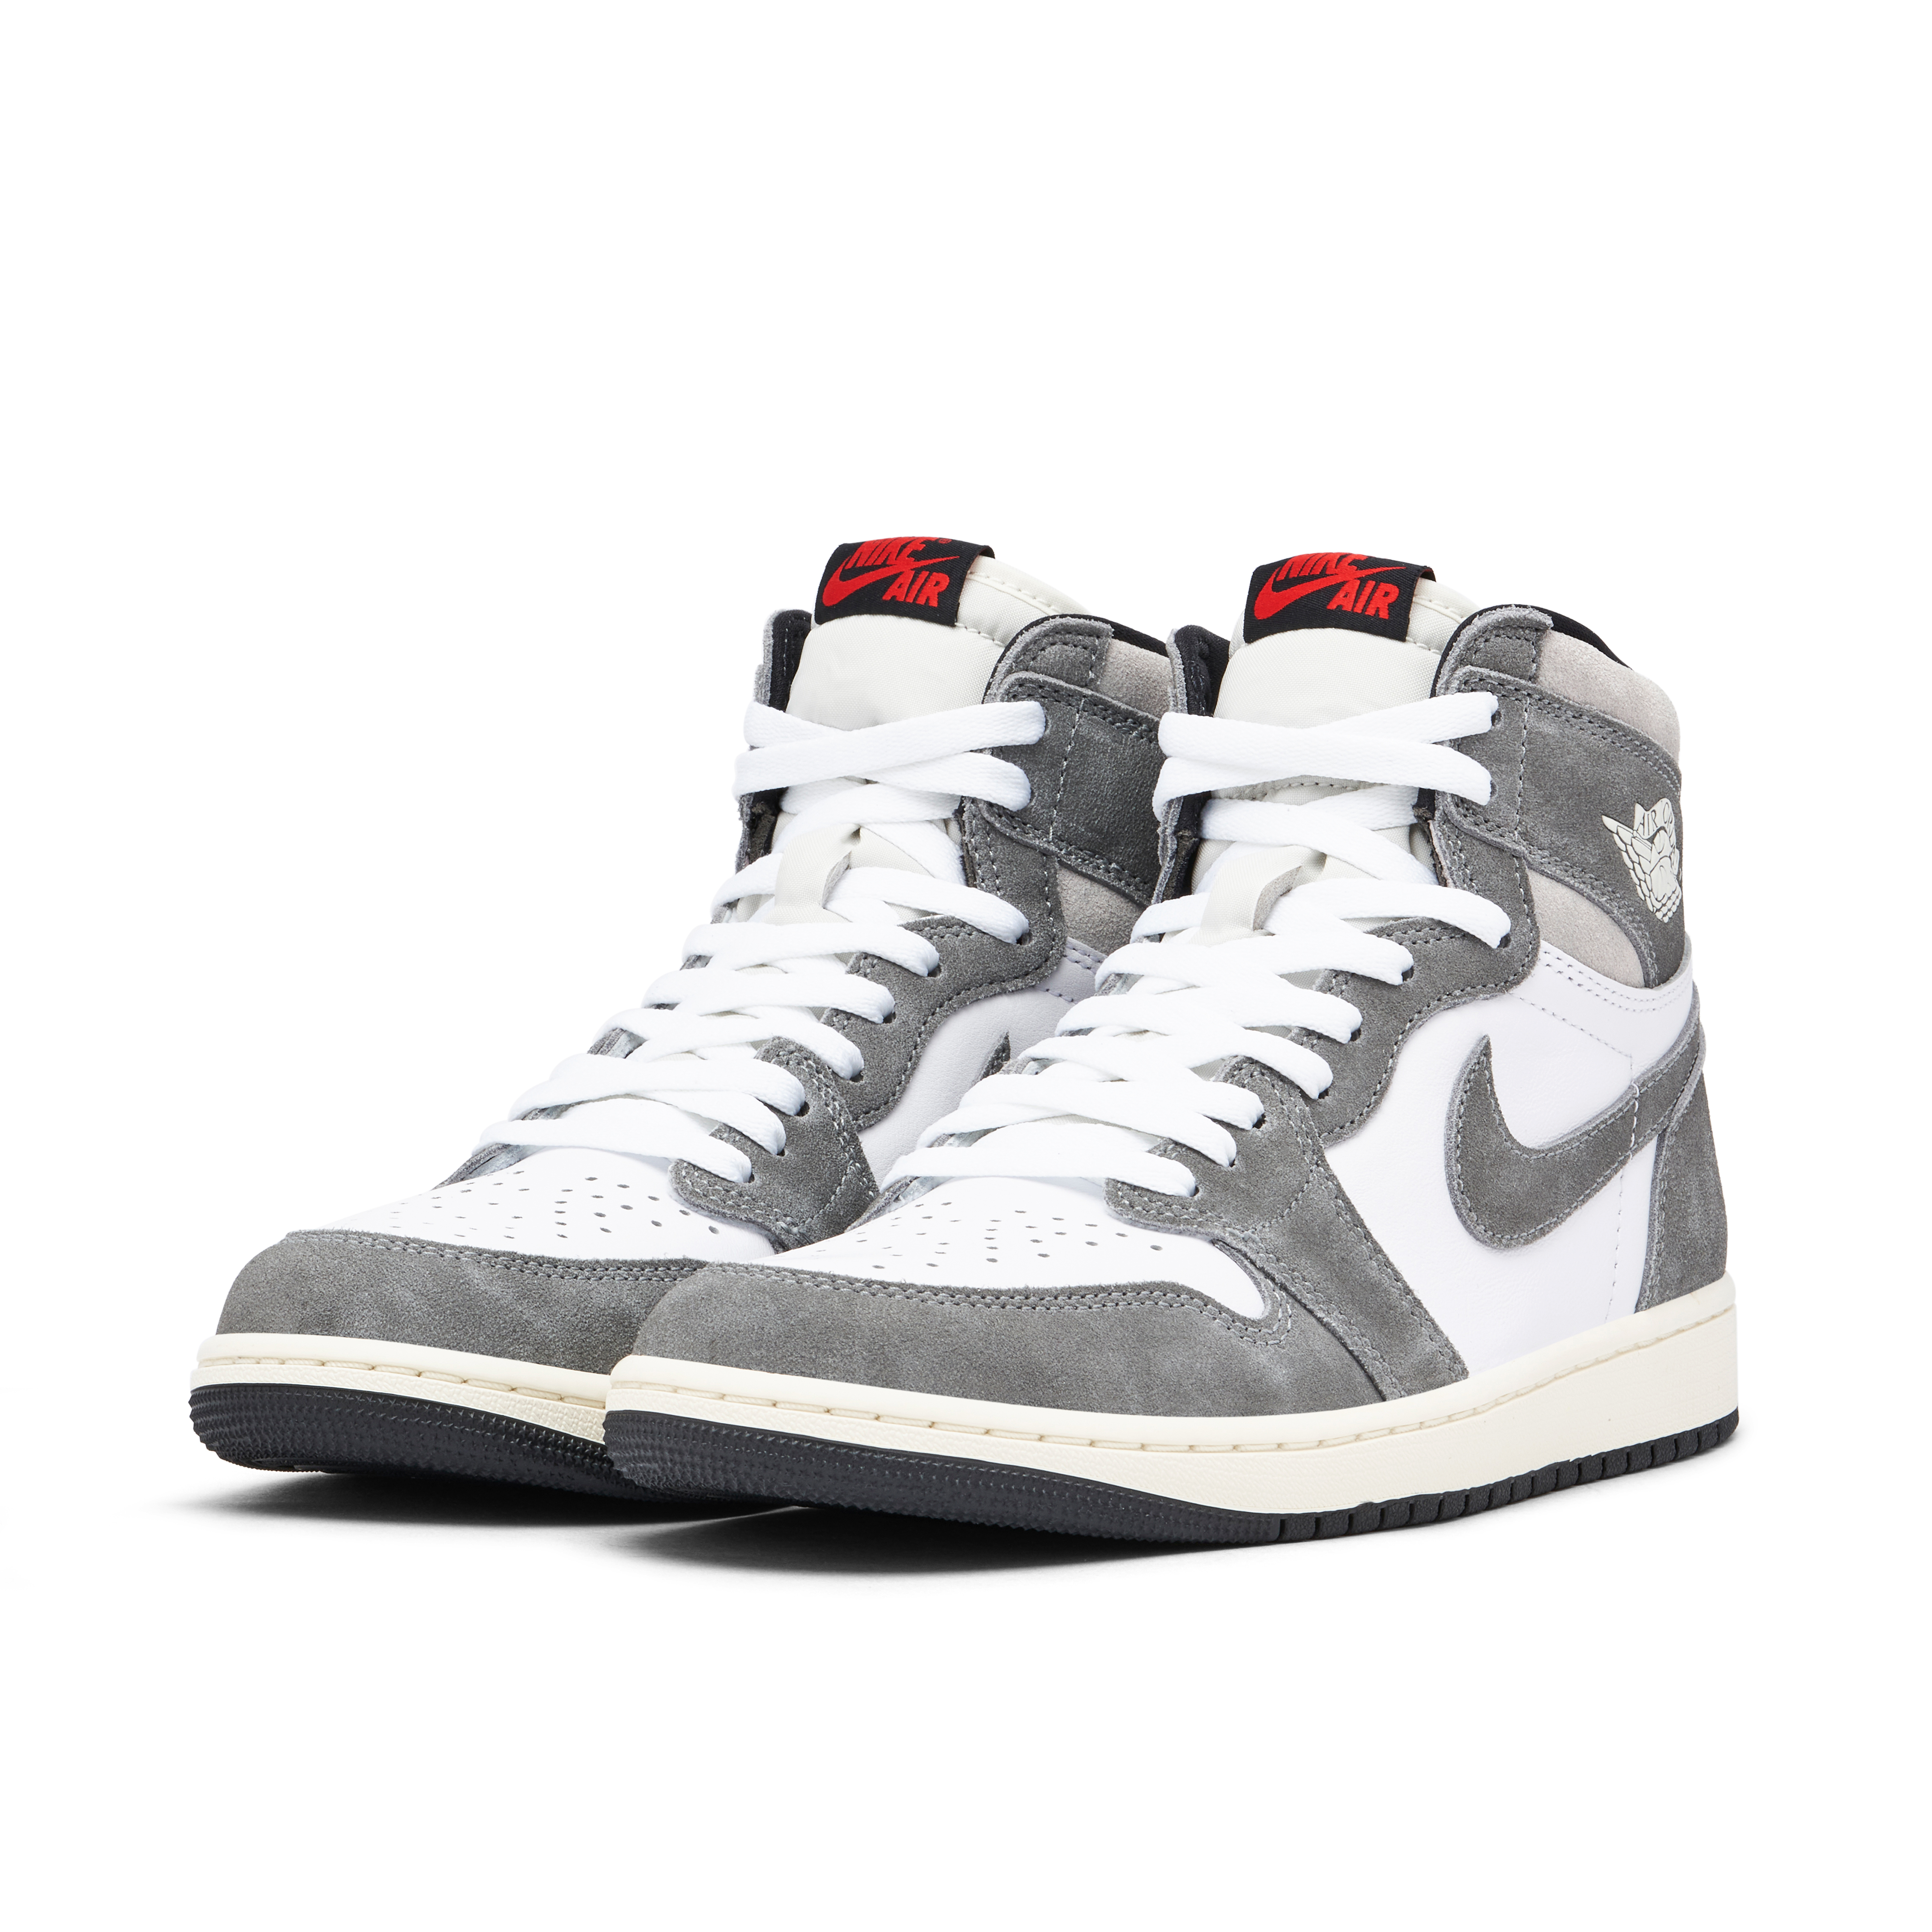 Jordan 1 Retro High OG 'Washed Black' w/Sail laces… : r/Sneakers